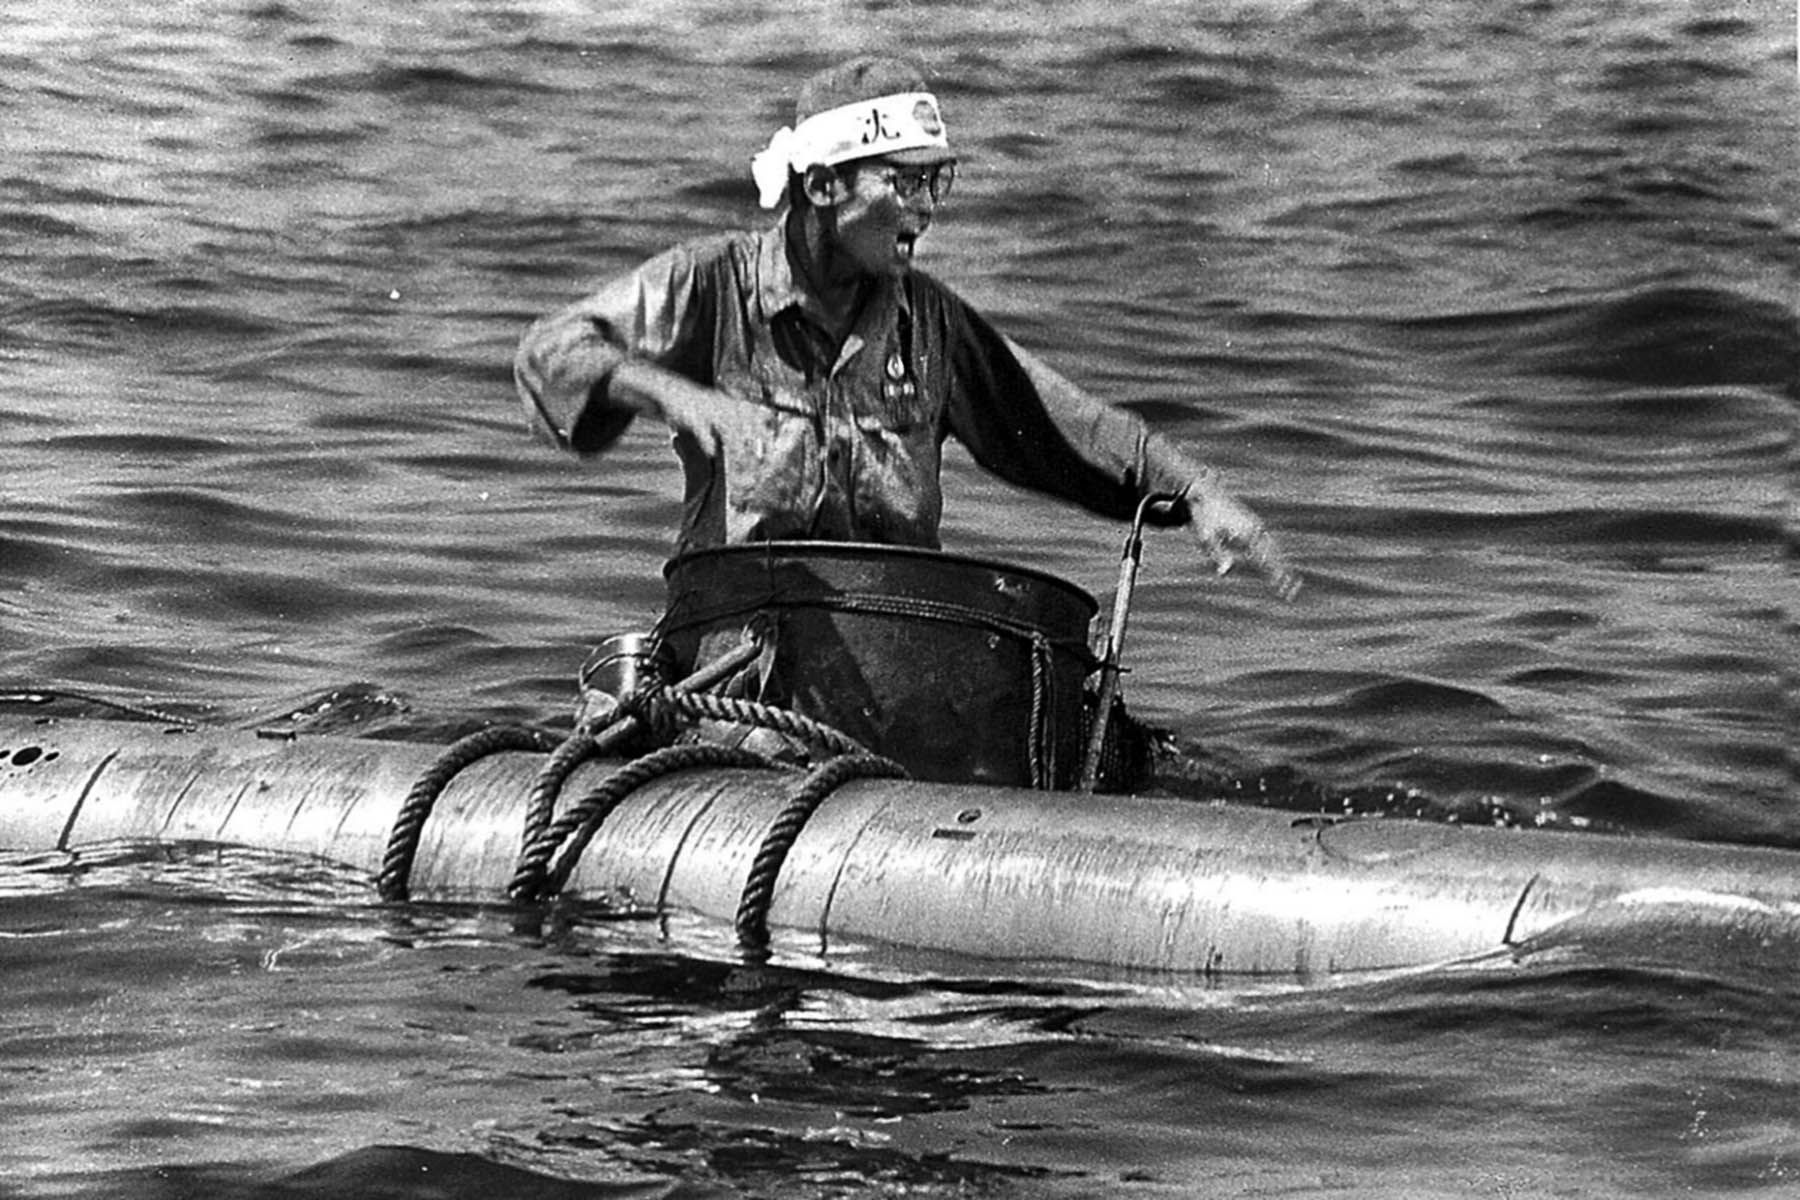 A Japanese Kaiten pilot in training maneuvers. The one-man subs were made from Japan’s successful Type 93 torpedo.